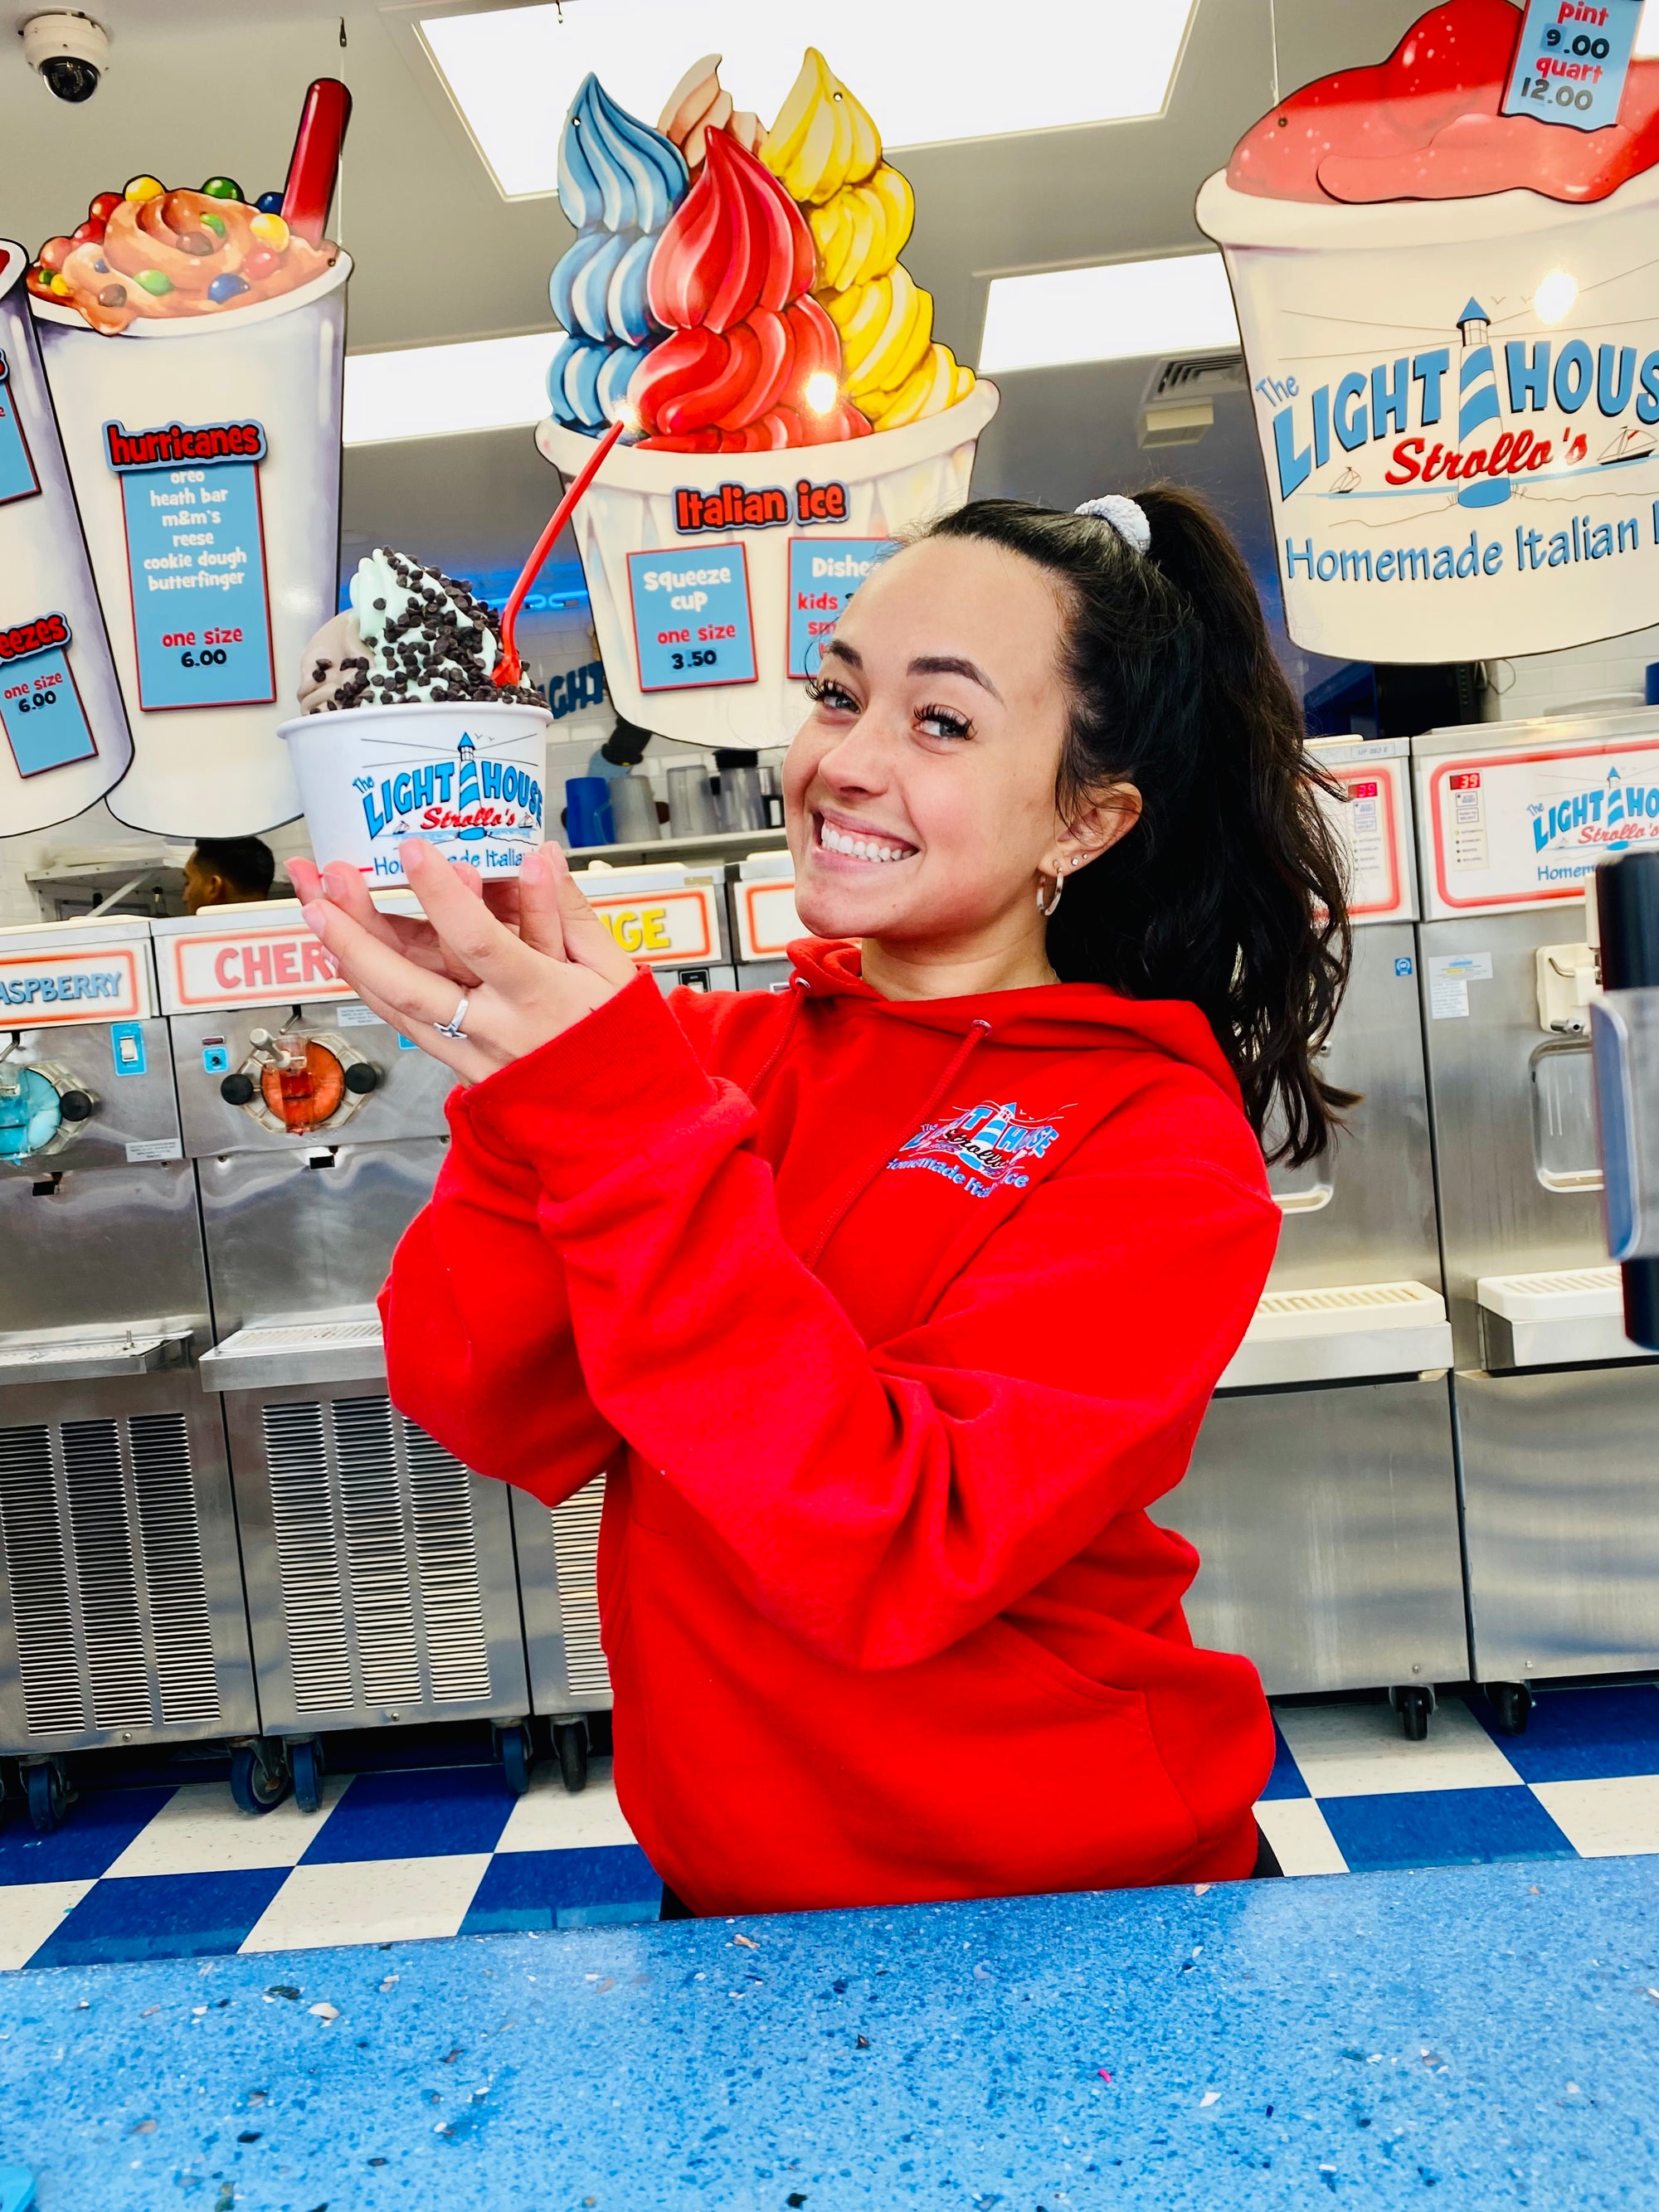 A Strollo's Lighthouse employee shows off a cup of soft serve ice cream and a big smile